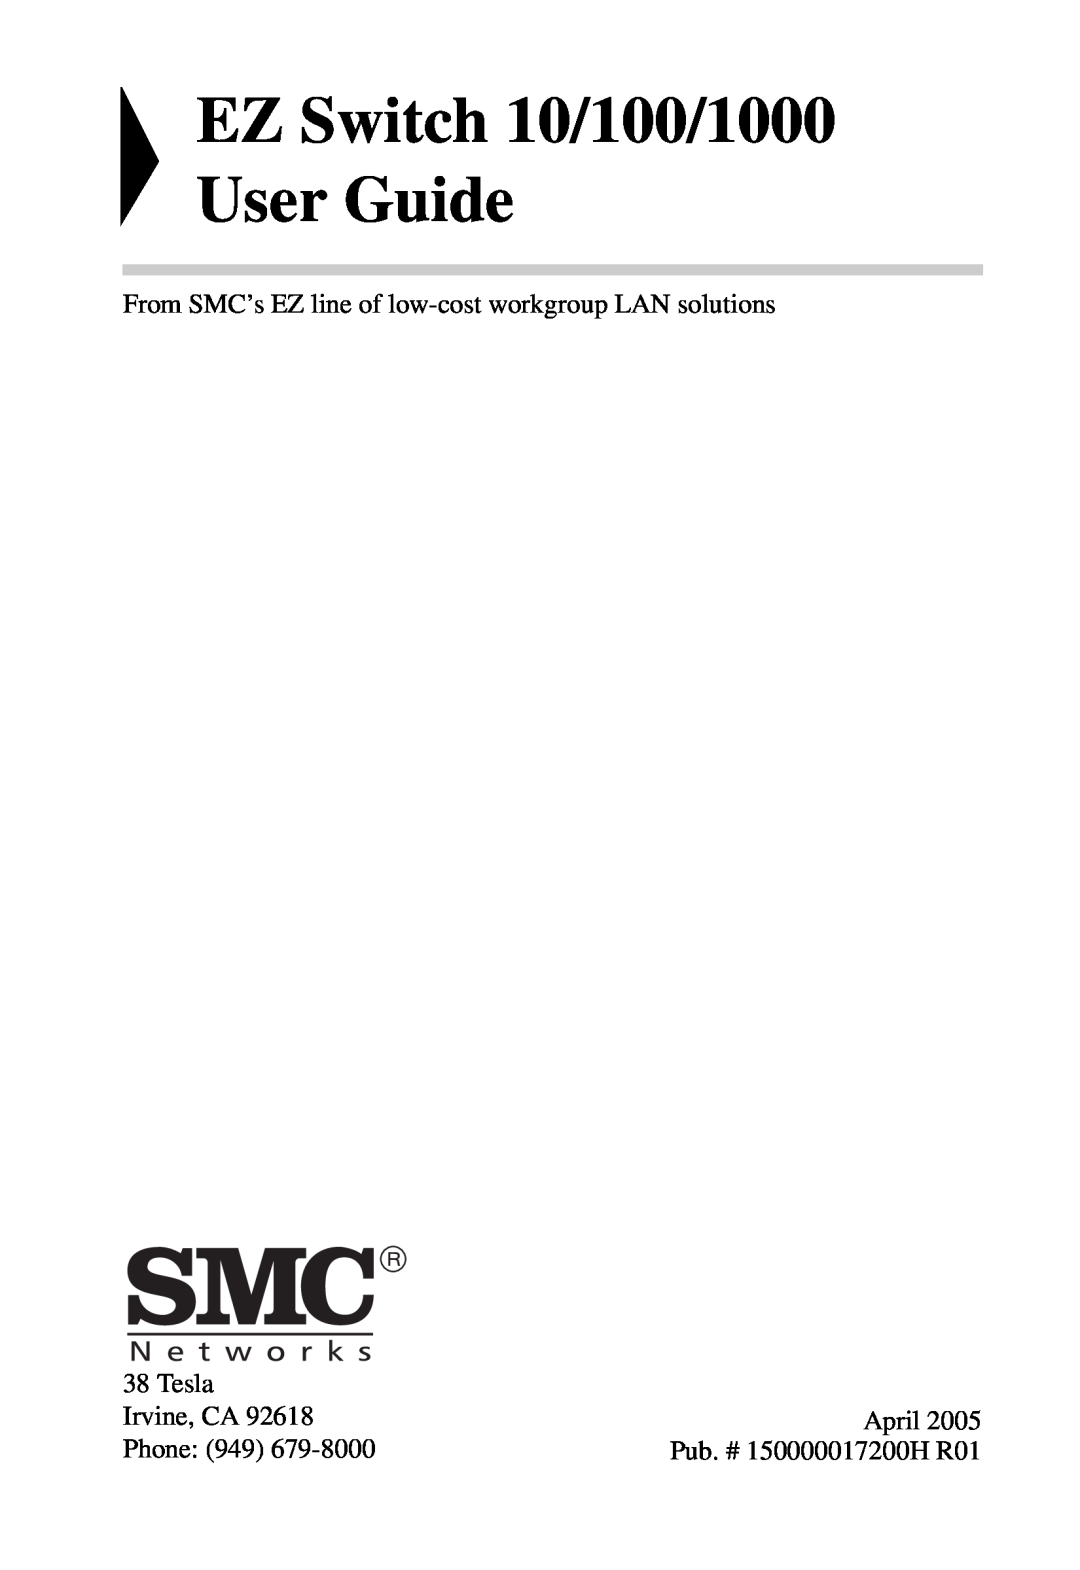 SMC Networks SMCGS24 manual EZ Switch 10/100/1000 User Guide, From SMC’s EZ line of low-cost workgroup LAN solutions, Tesla 